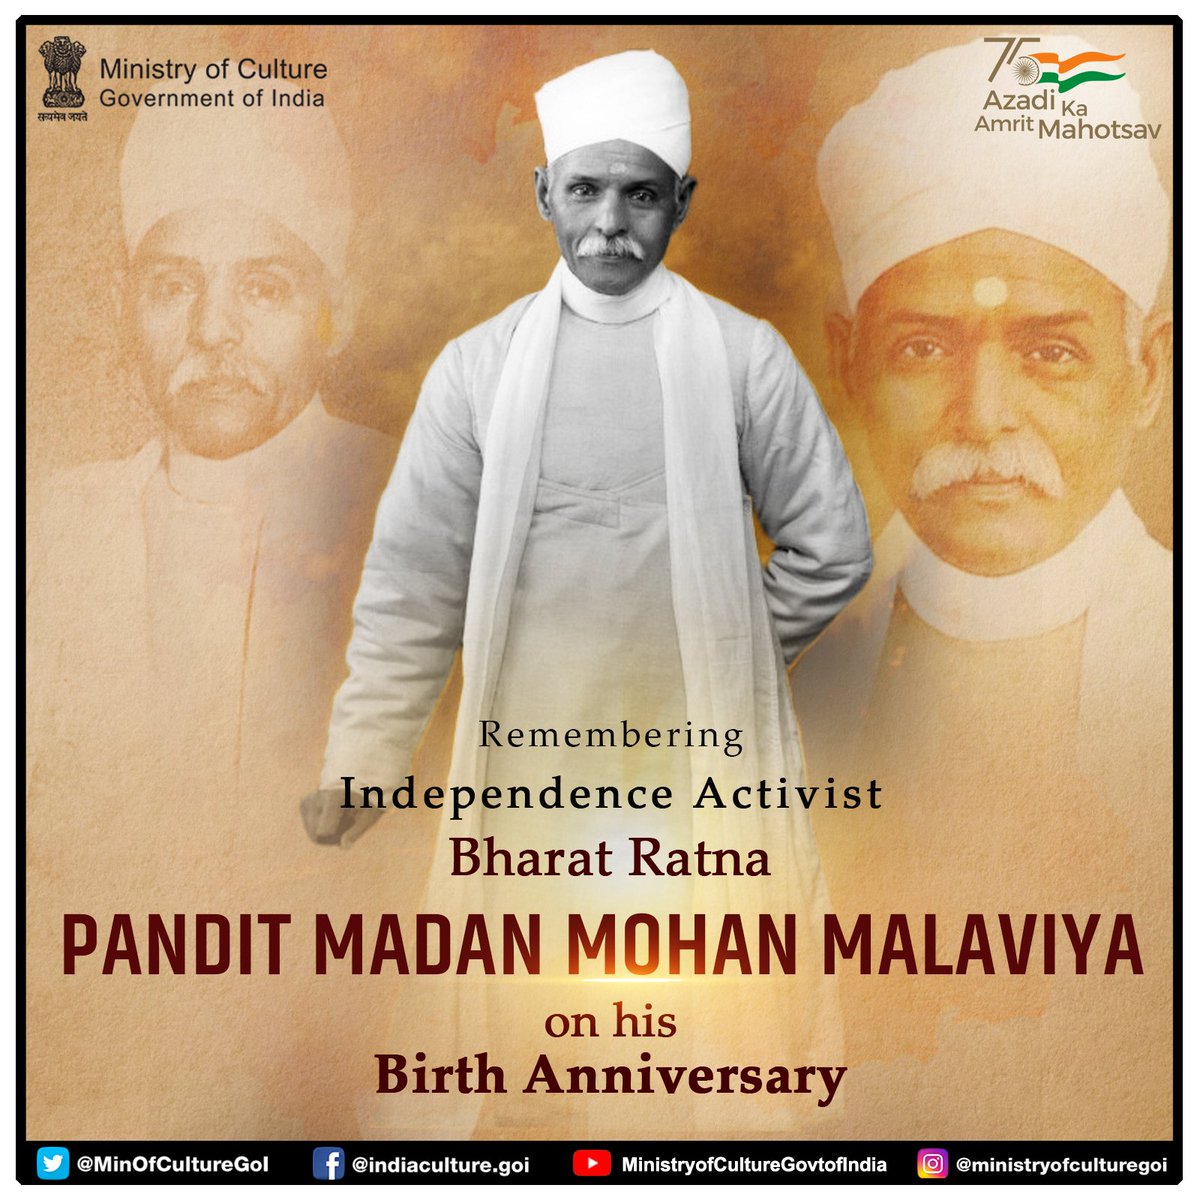 Tribute to the legendary Independence activist & educationist, #PanditMadanMohanMalaviya on his Birth Anniversary. He will always be remembered for his remarkable contributions in the freedom struggle & establishment of a prominent institution like @bhupro. #AmritMahotsav